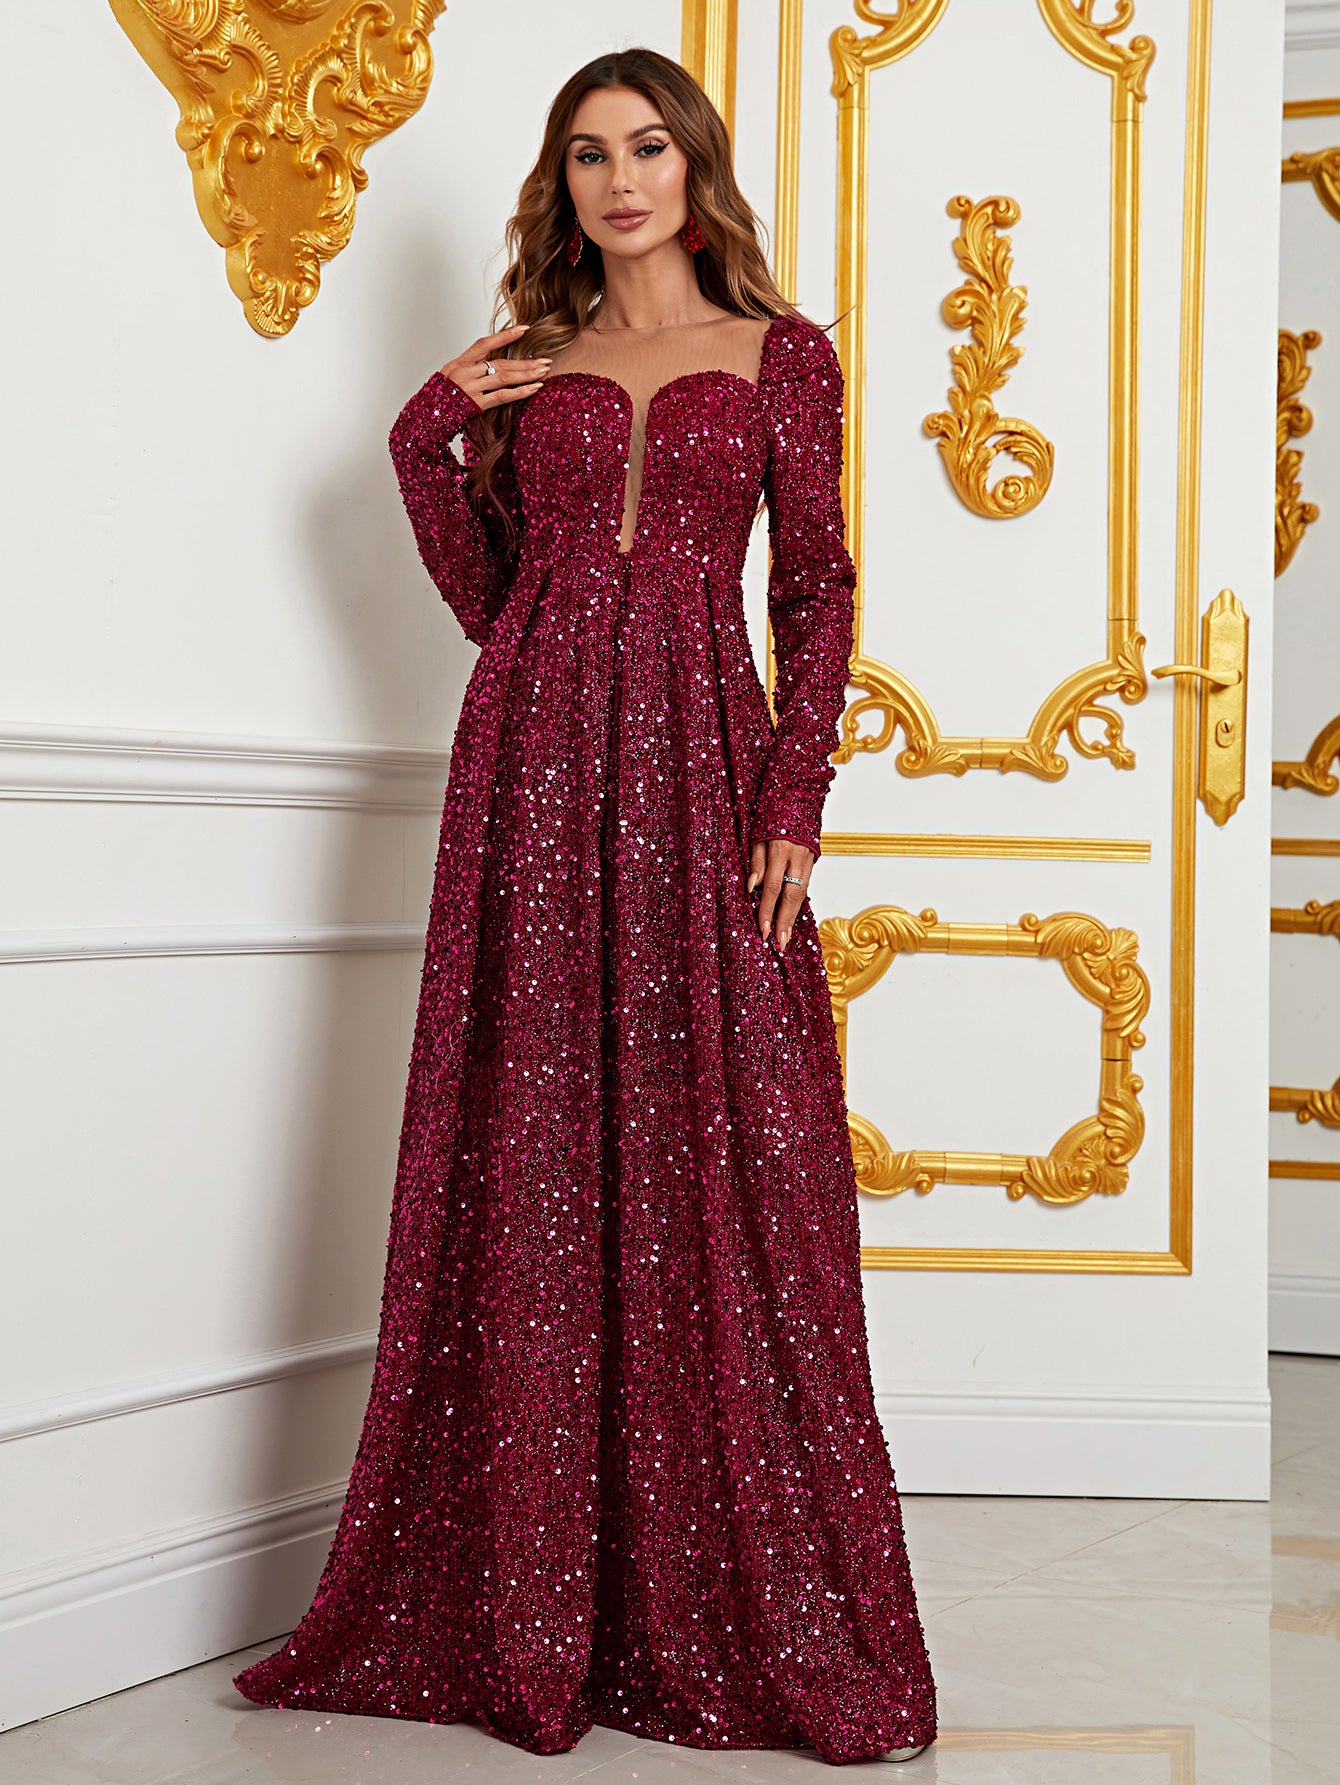 Sweetheart Neck Long Sleeve Sequin A Line Dresses